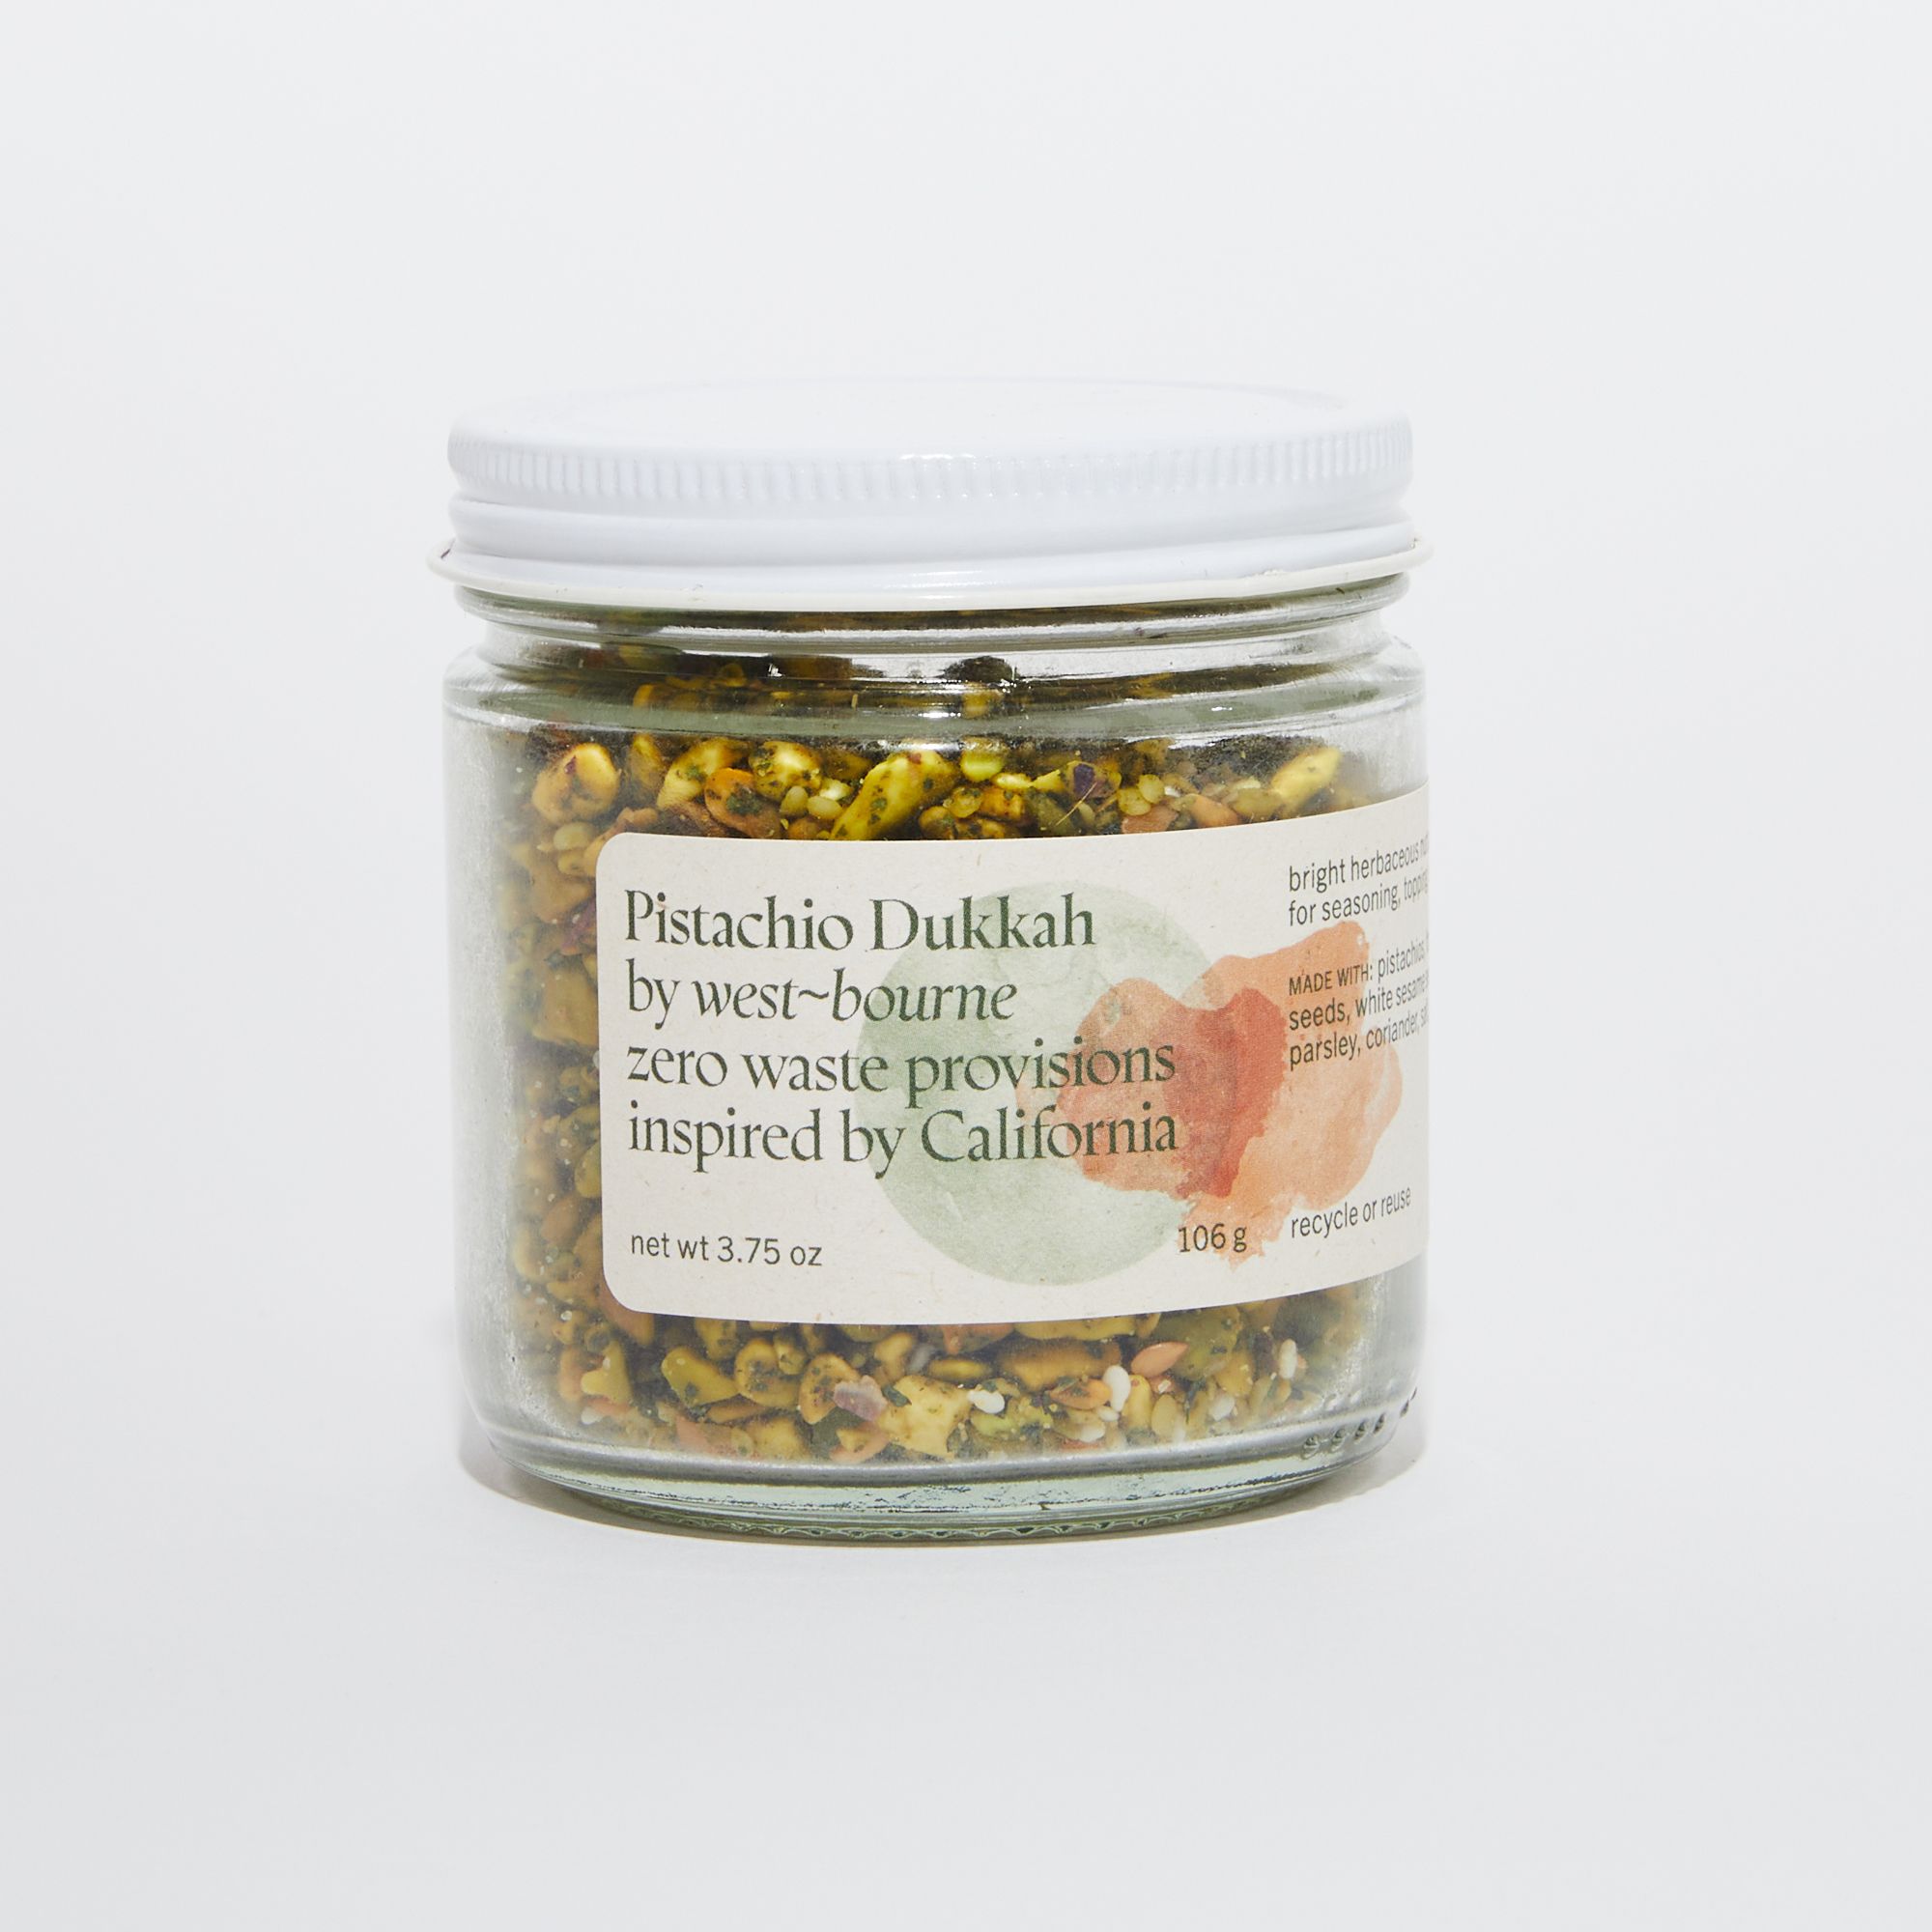 Clear jar of dukkah with a white lid and a label that reads "Pistachio Dukkah by west-bourne zero waste provisions inspired by California"